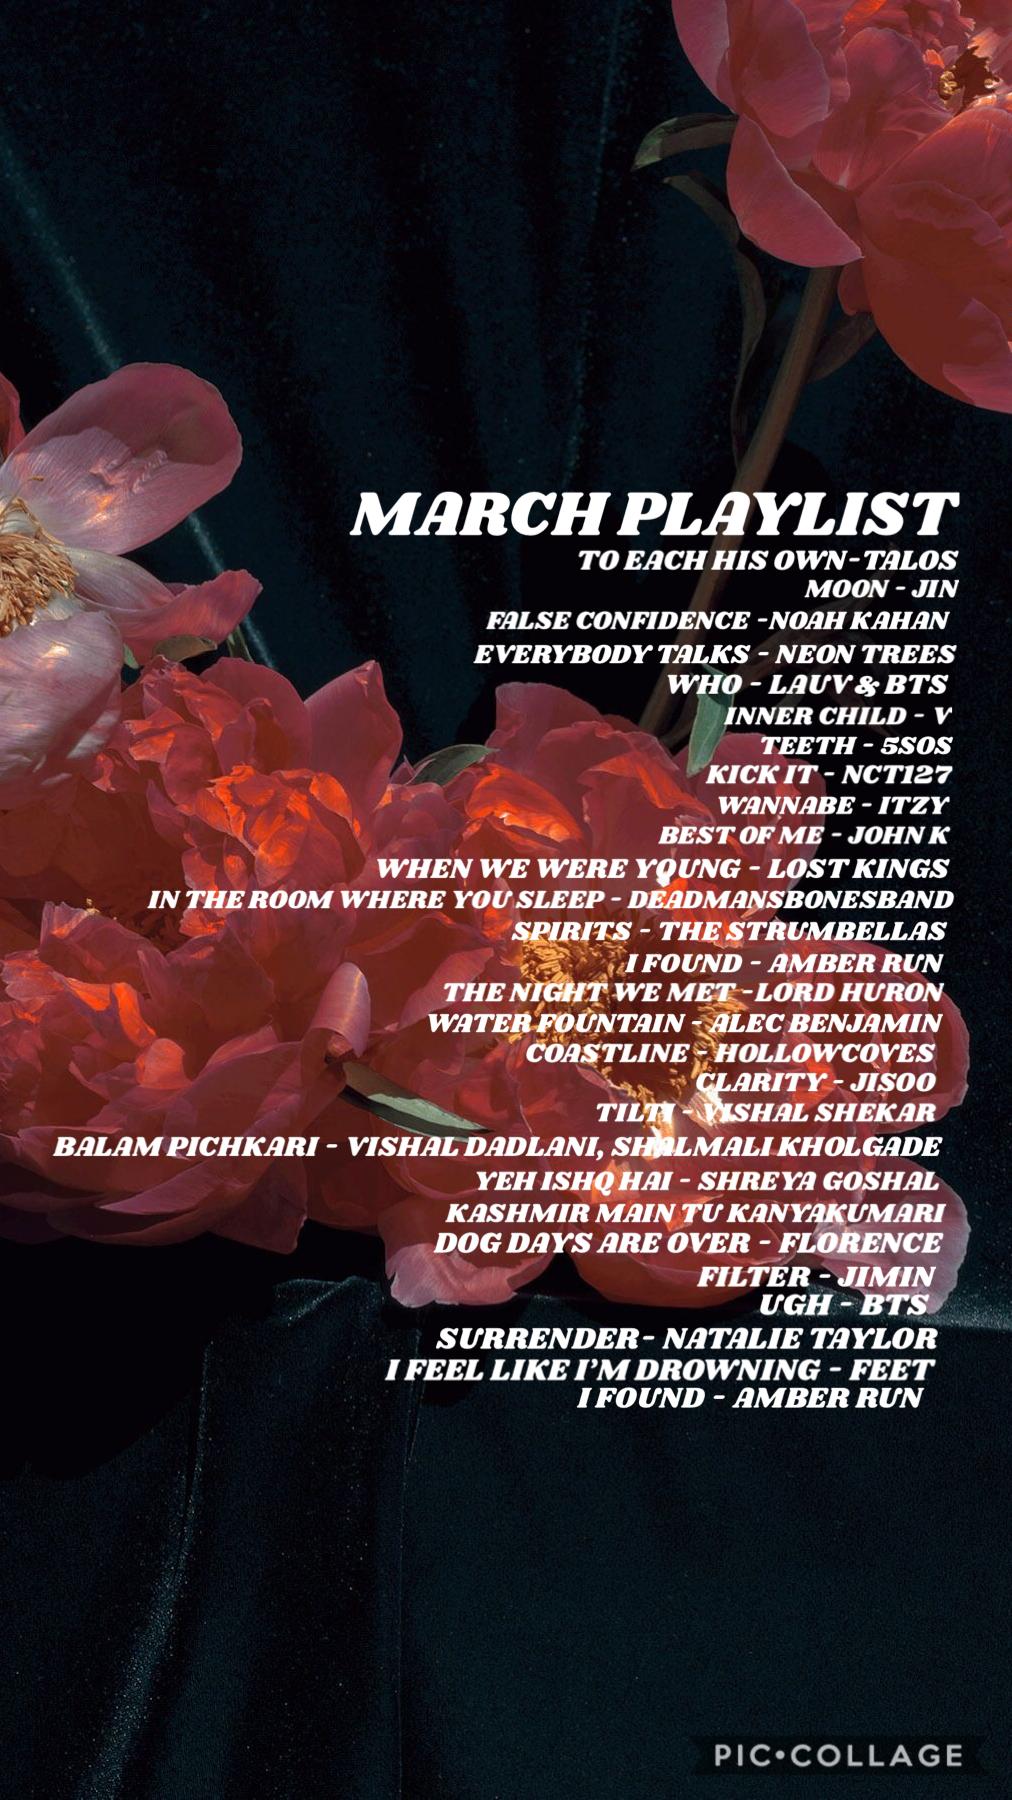 🌸enjoy this march playlist, i usually don’t post them on my main but, i.. don’t have anything else to post lol🌸i’ll post a update soon because there’s a ton going on in my life, but until then how’s quarantine going??🌸 stay safe & wash your hands ☆